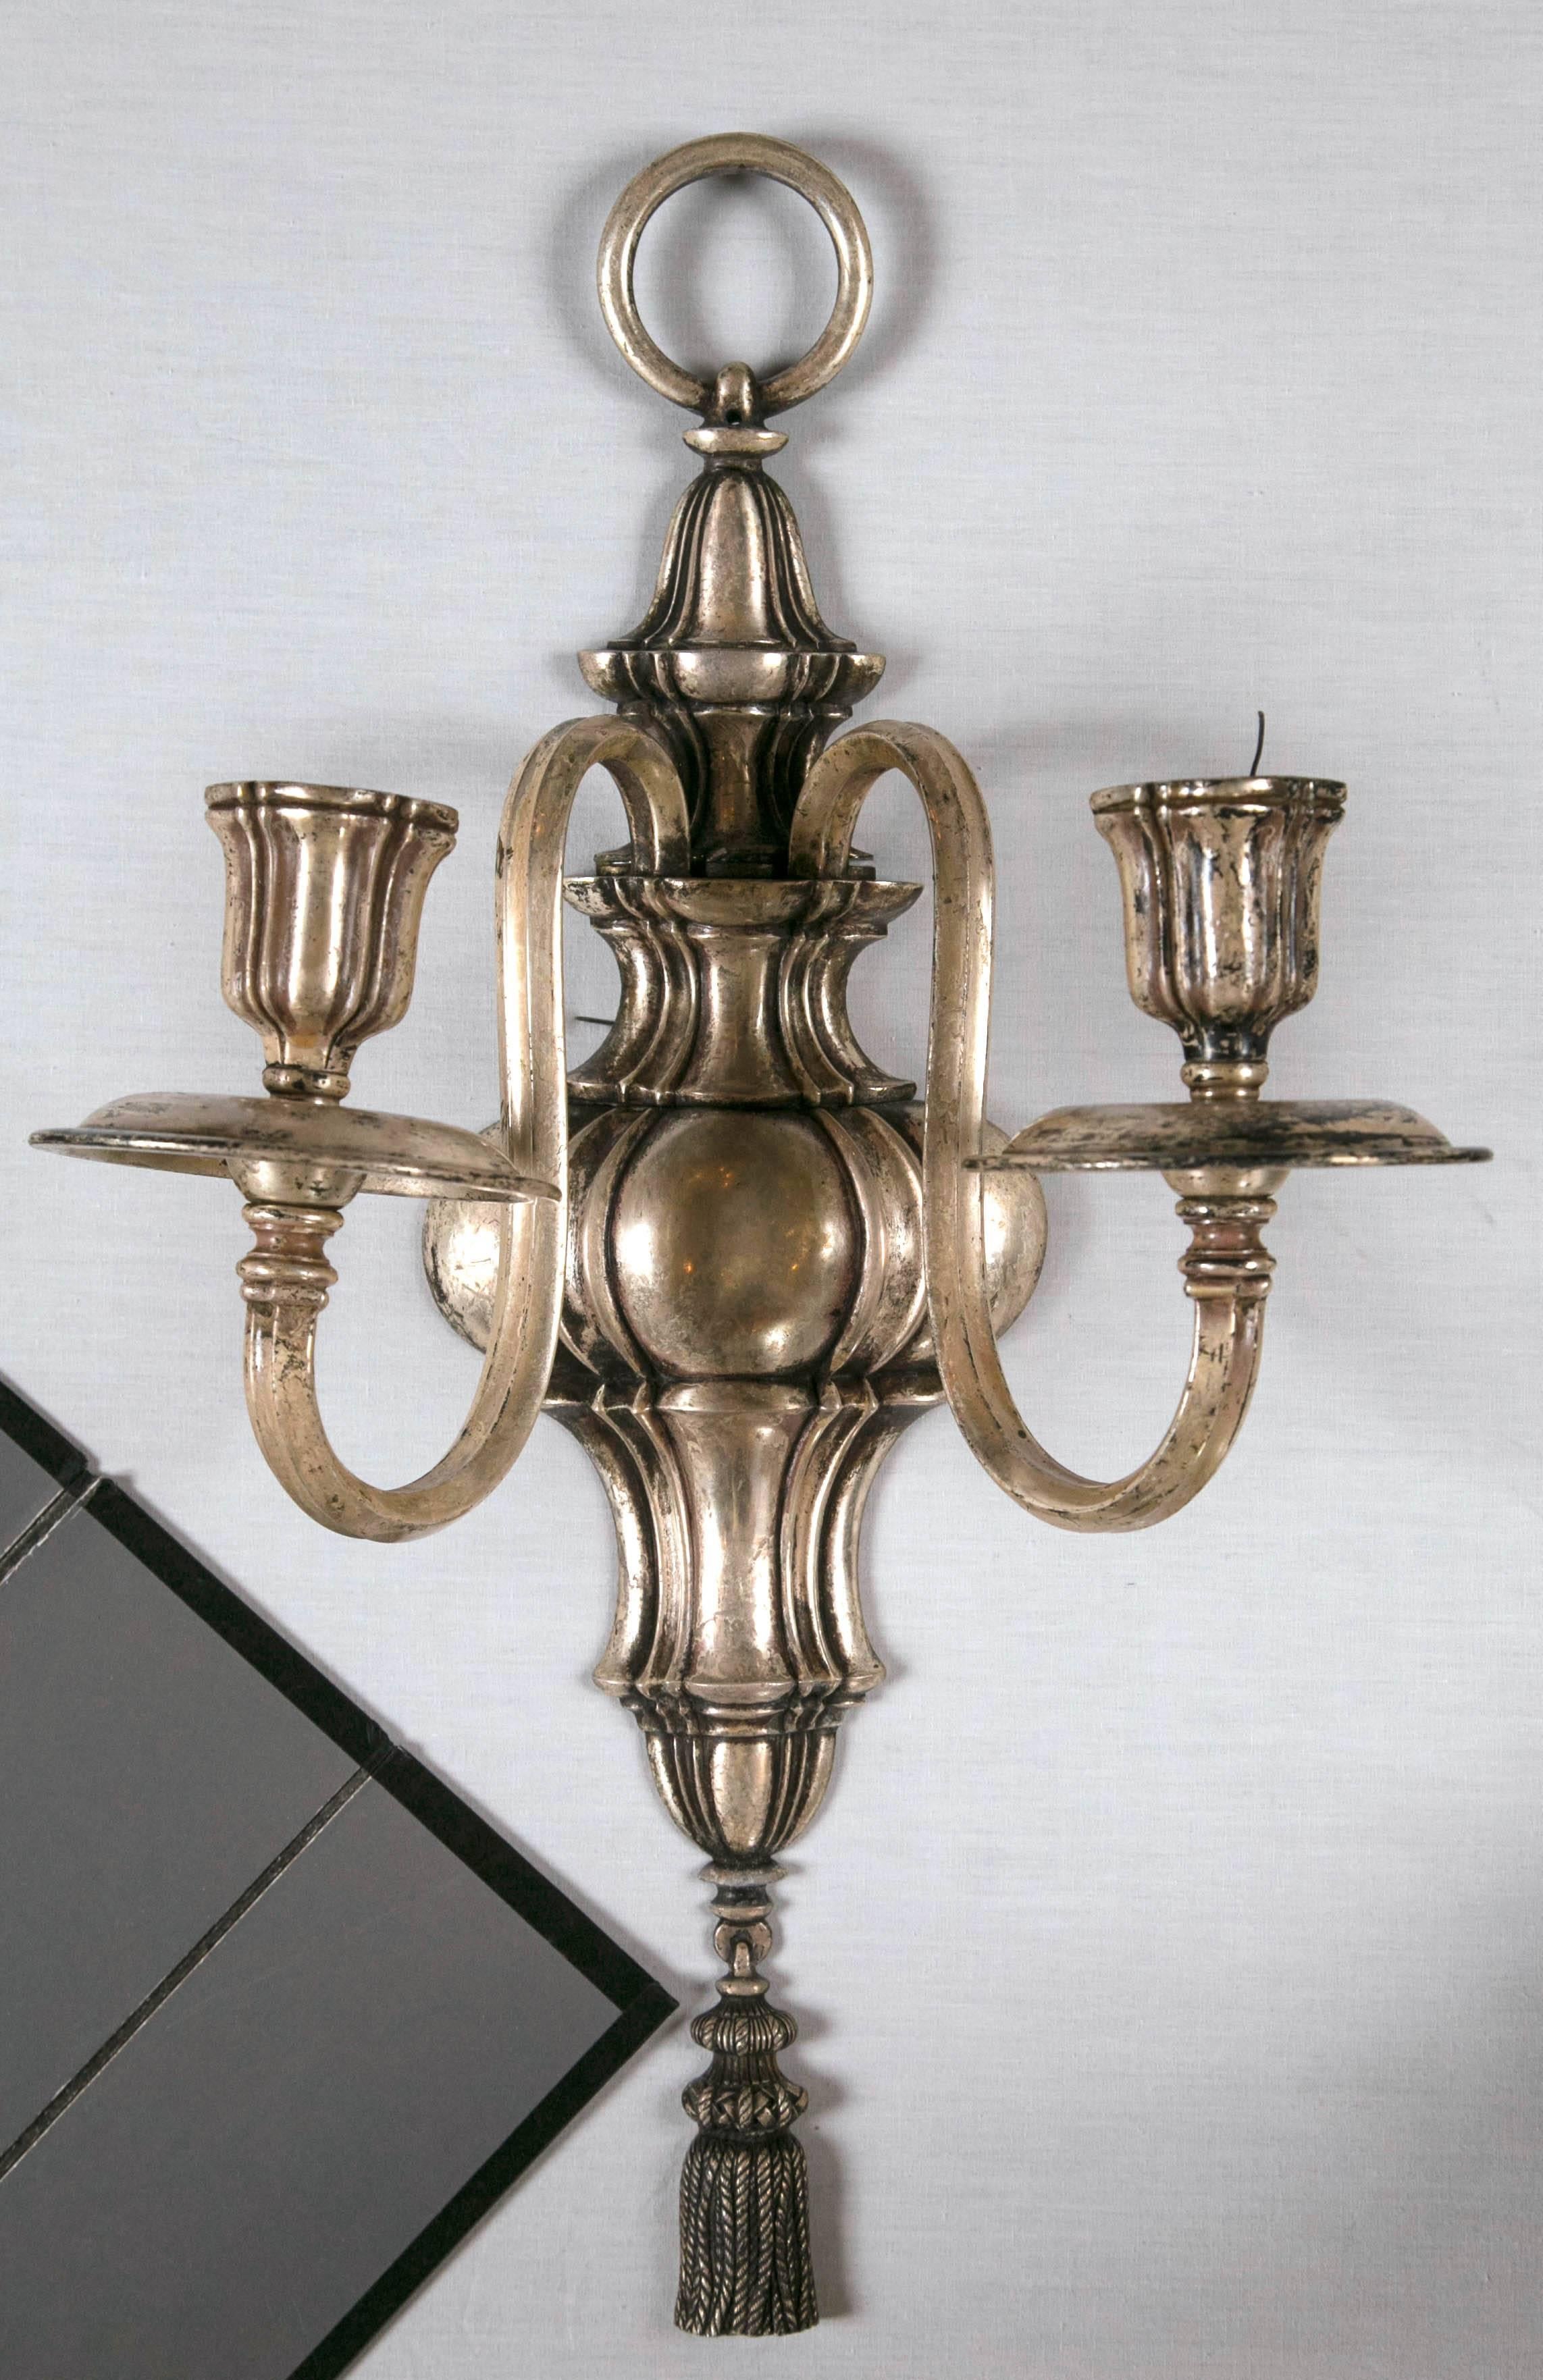 A rare set of 12 early Caldwell silver plated sconces. Priced per pair.